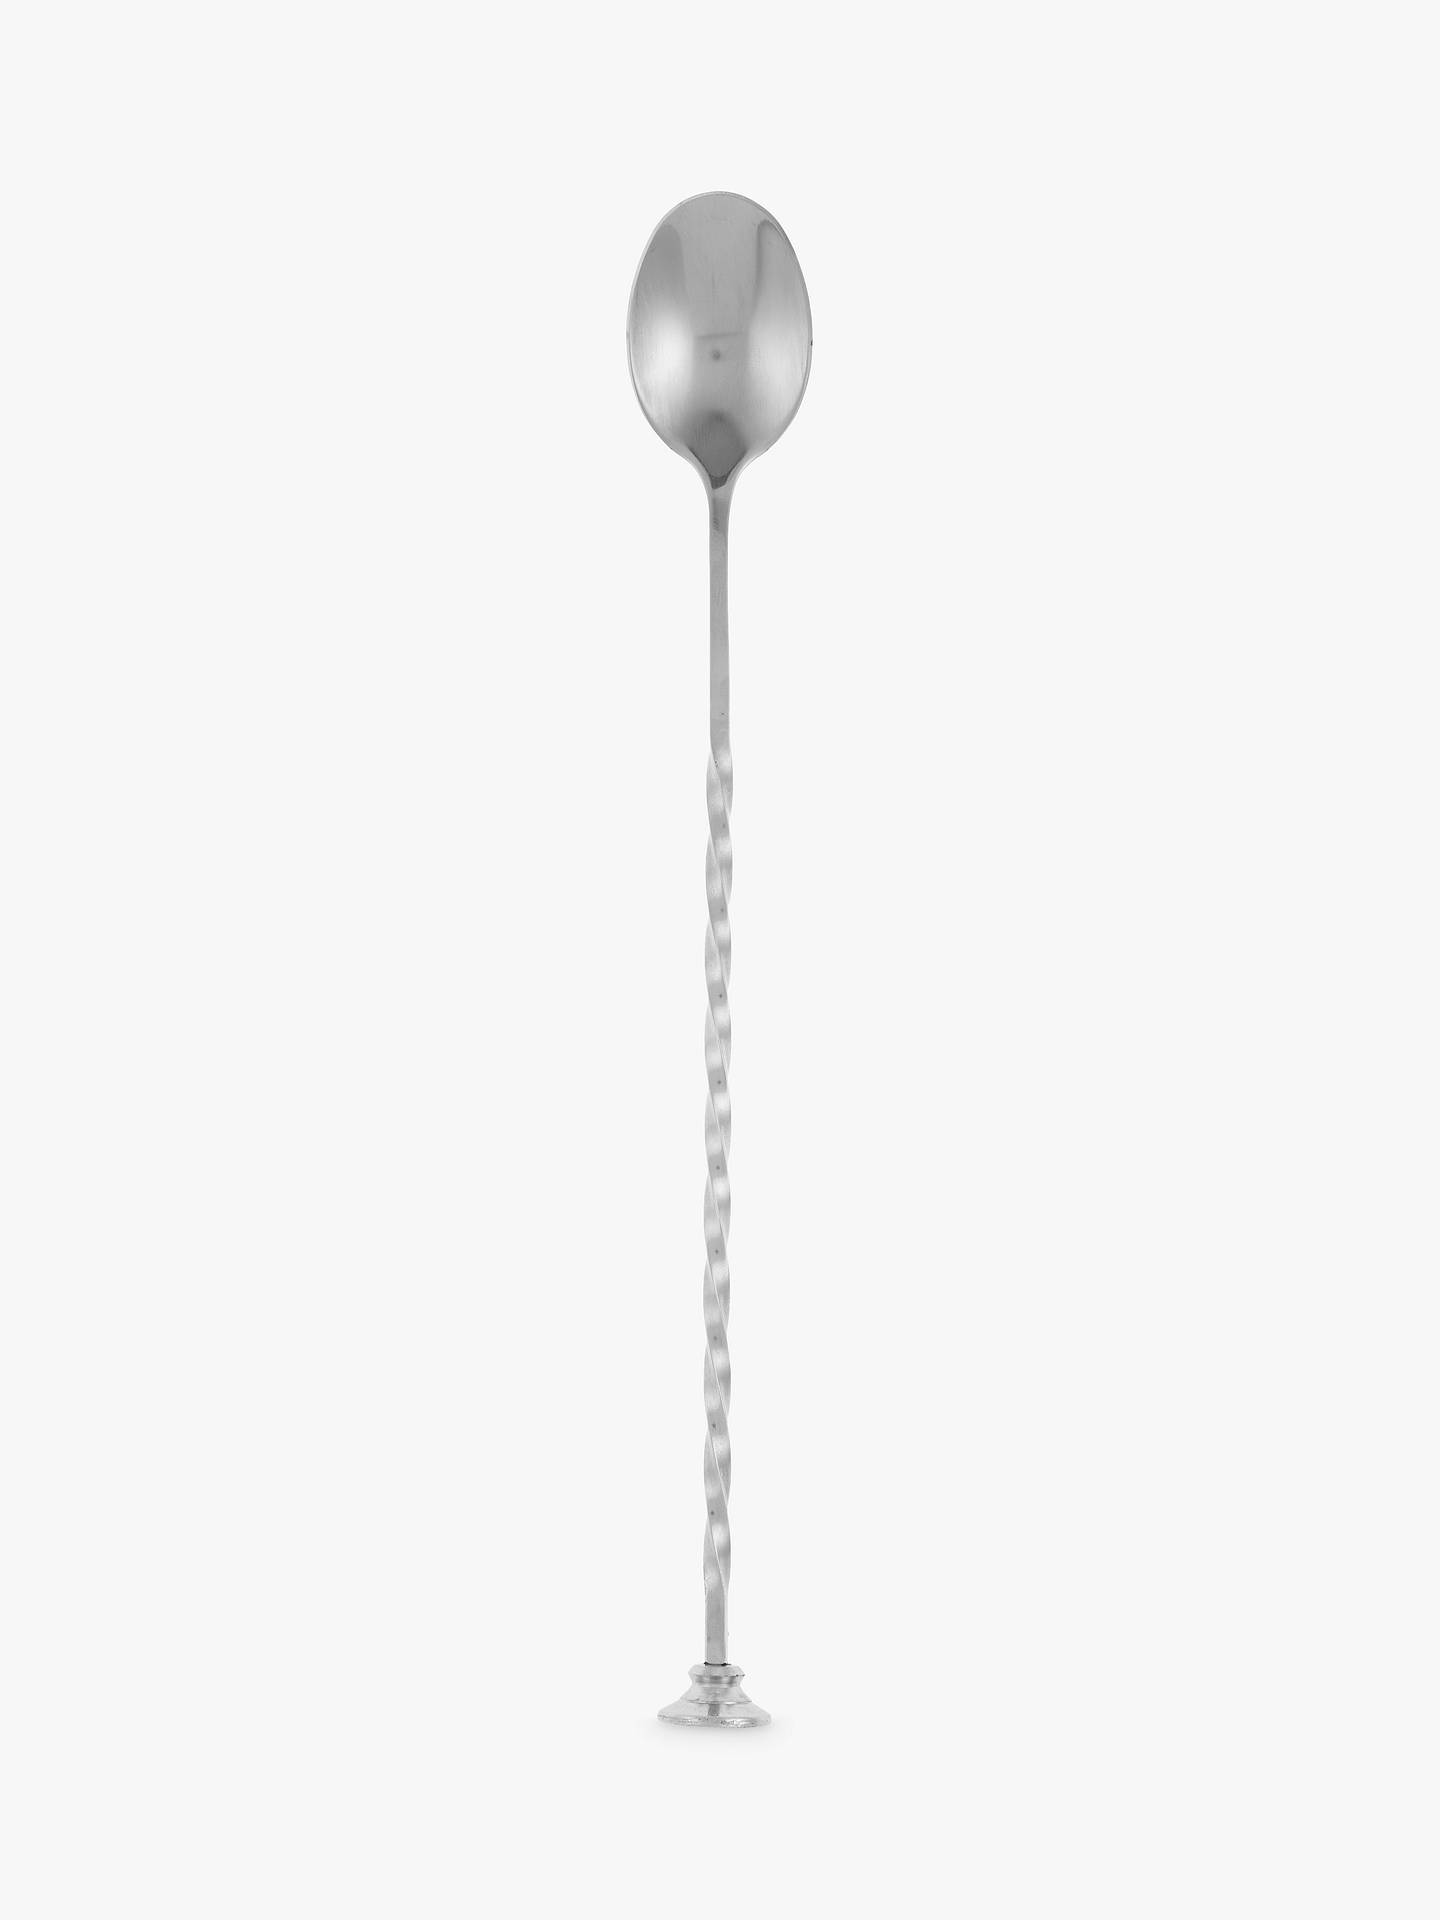 BuyJohn Lewis & Partners Cocktail Spoon Online at johnlewis.com